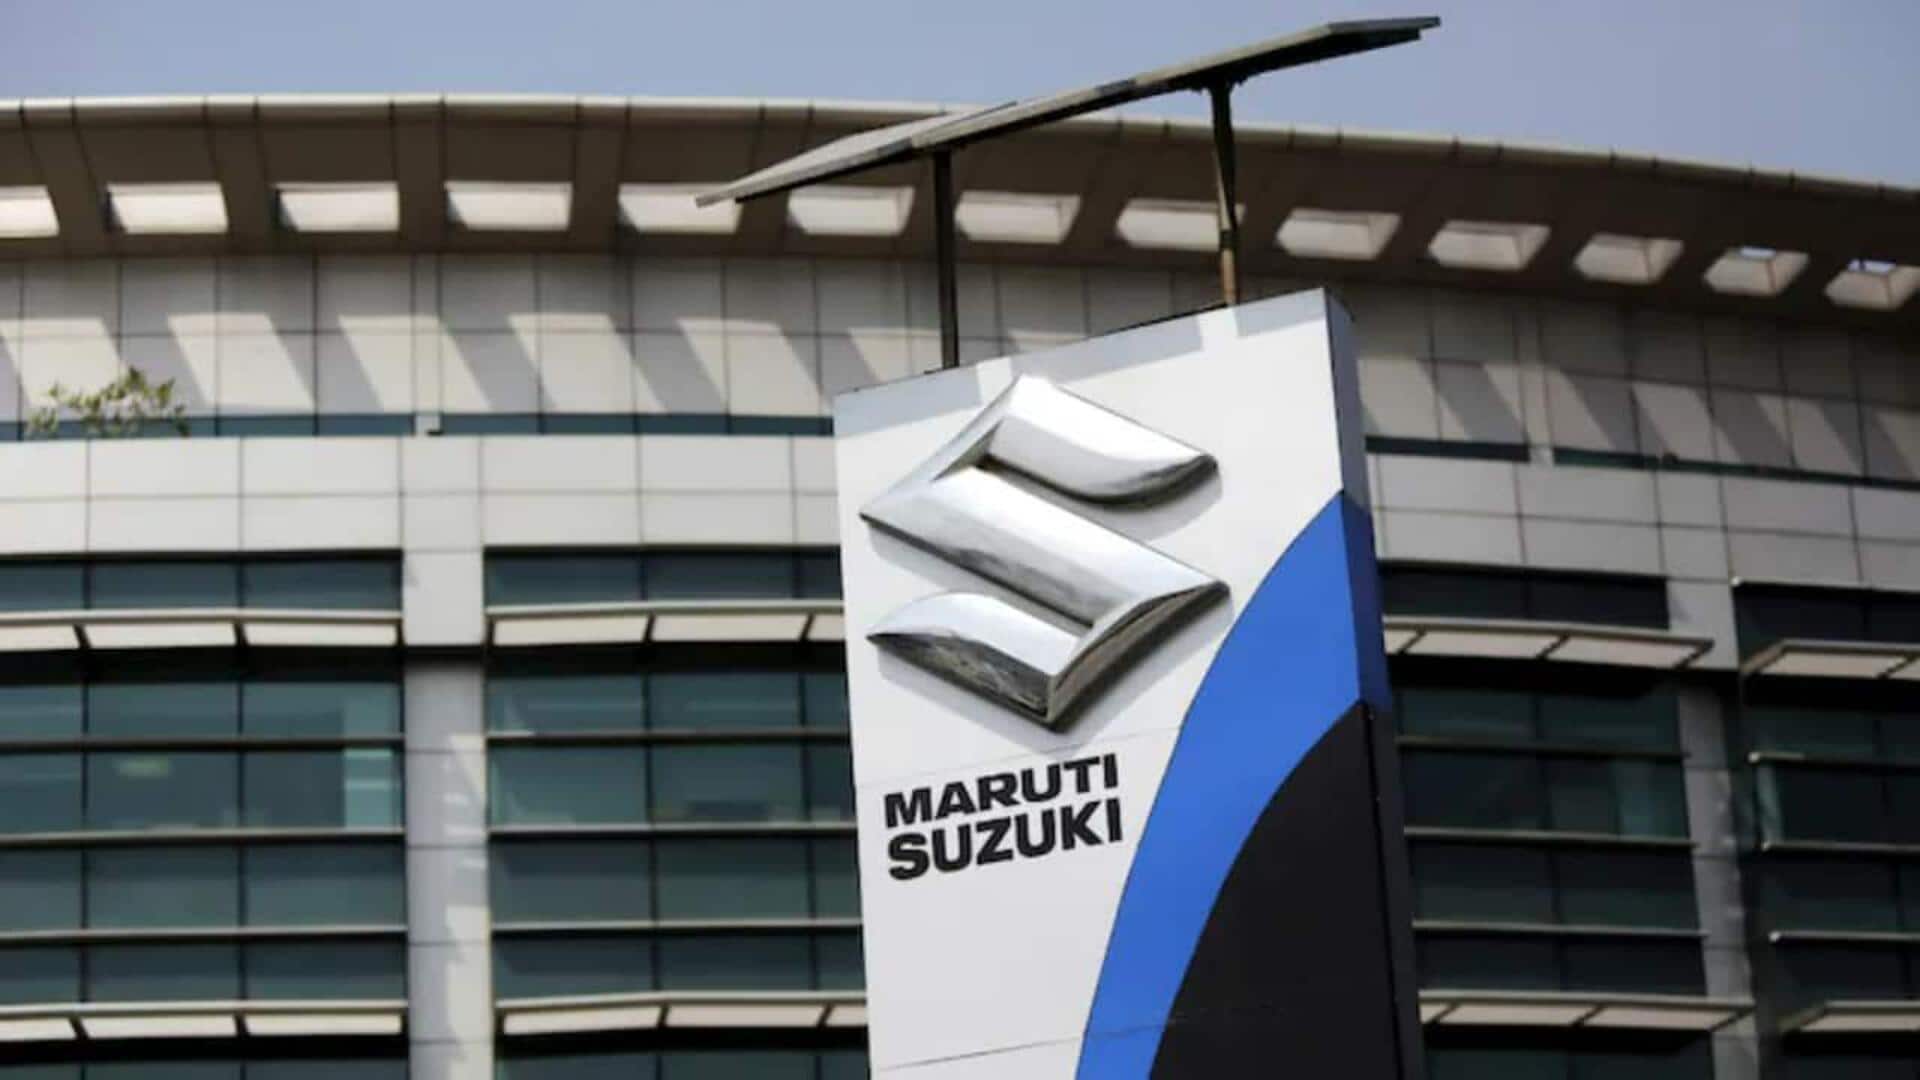 Maruti Suzuki hints at price hike for models: Here's why